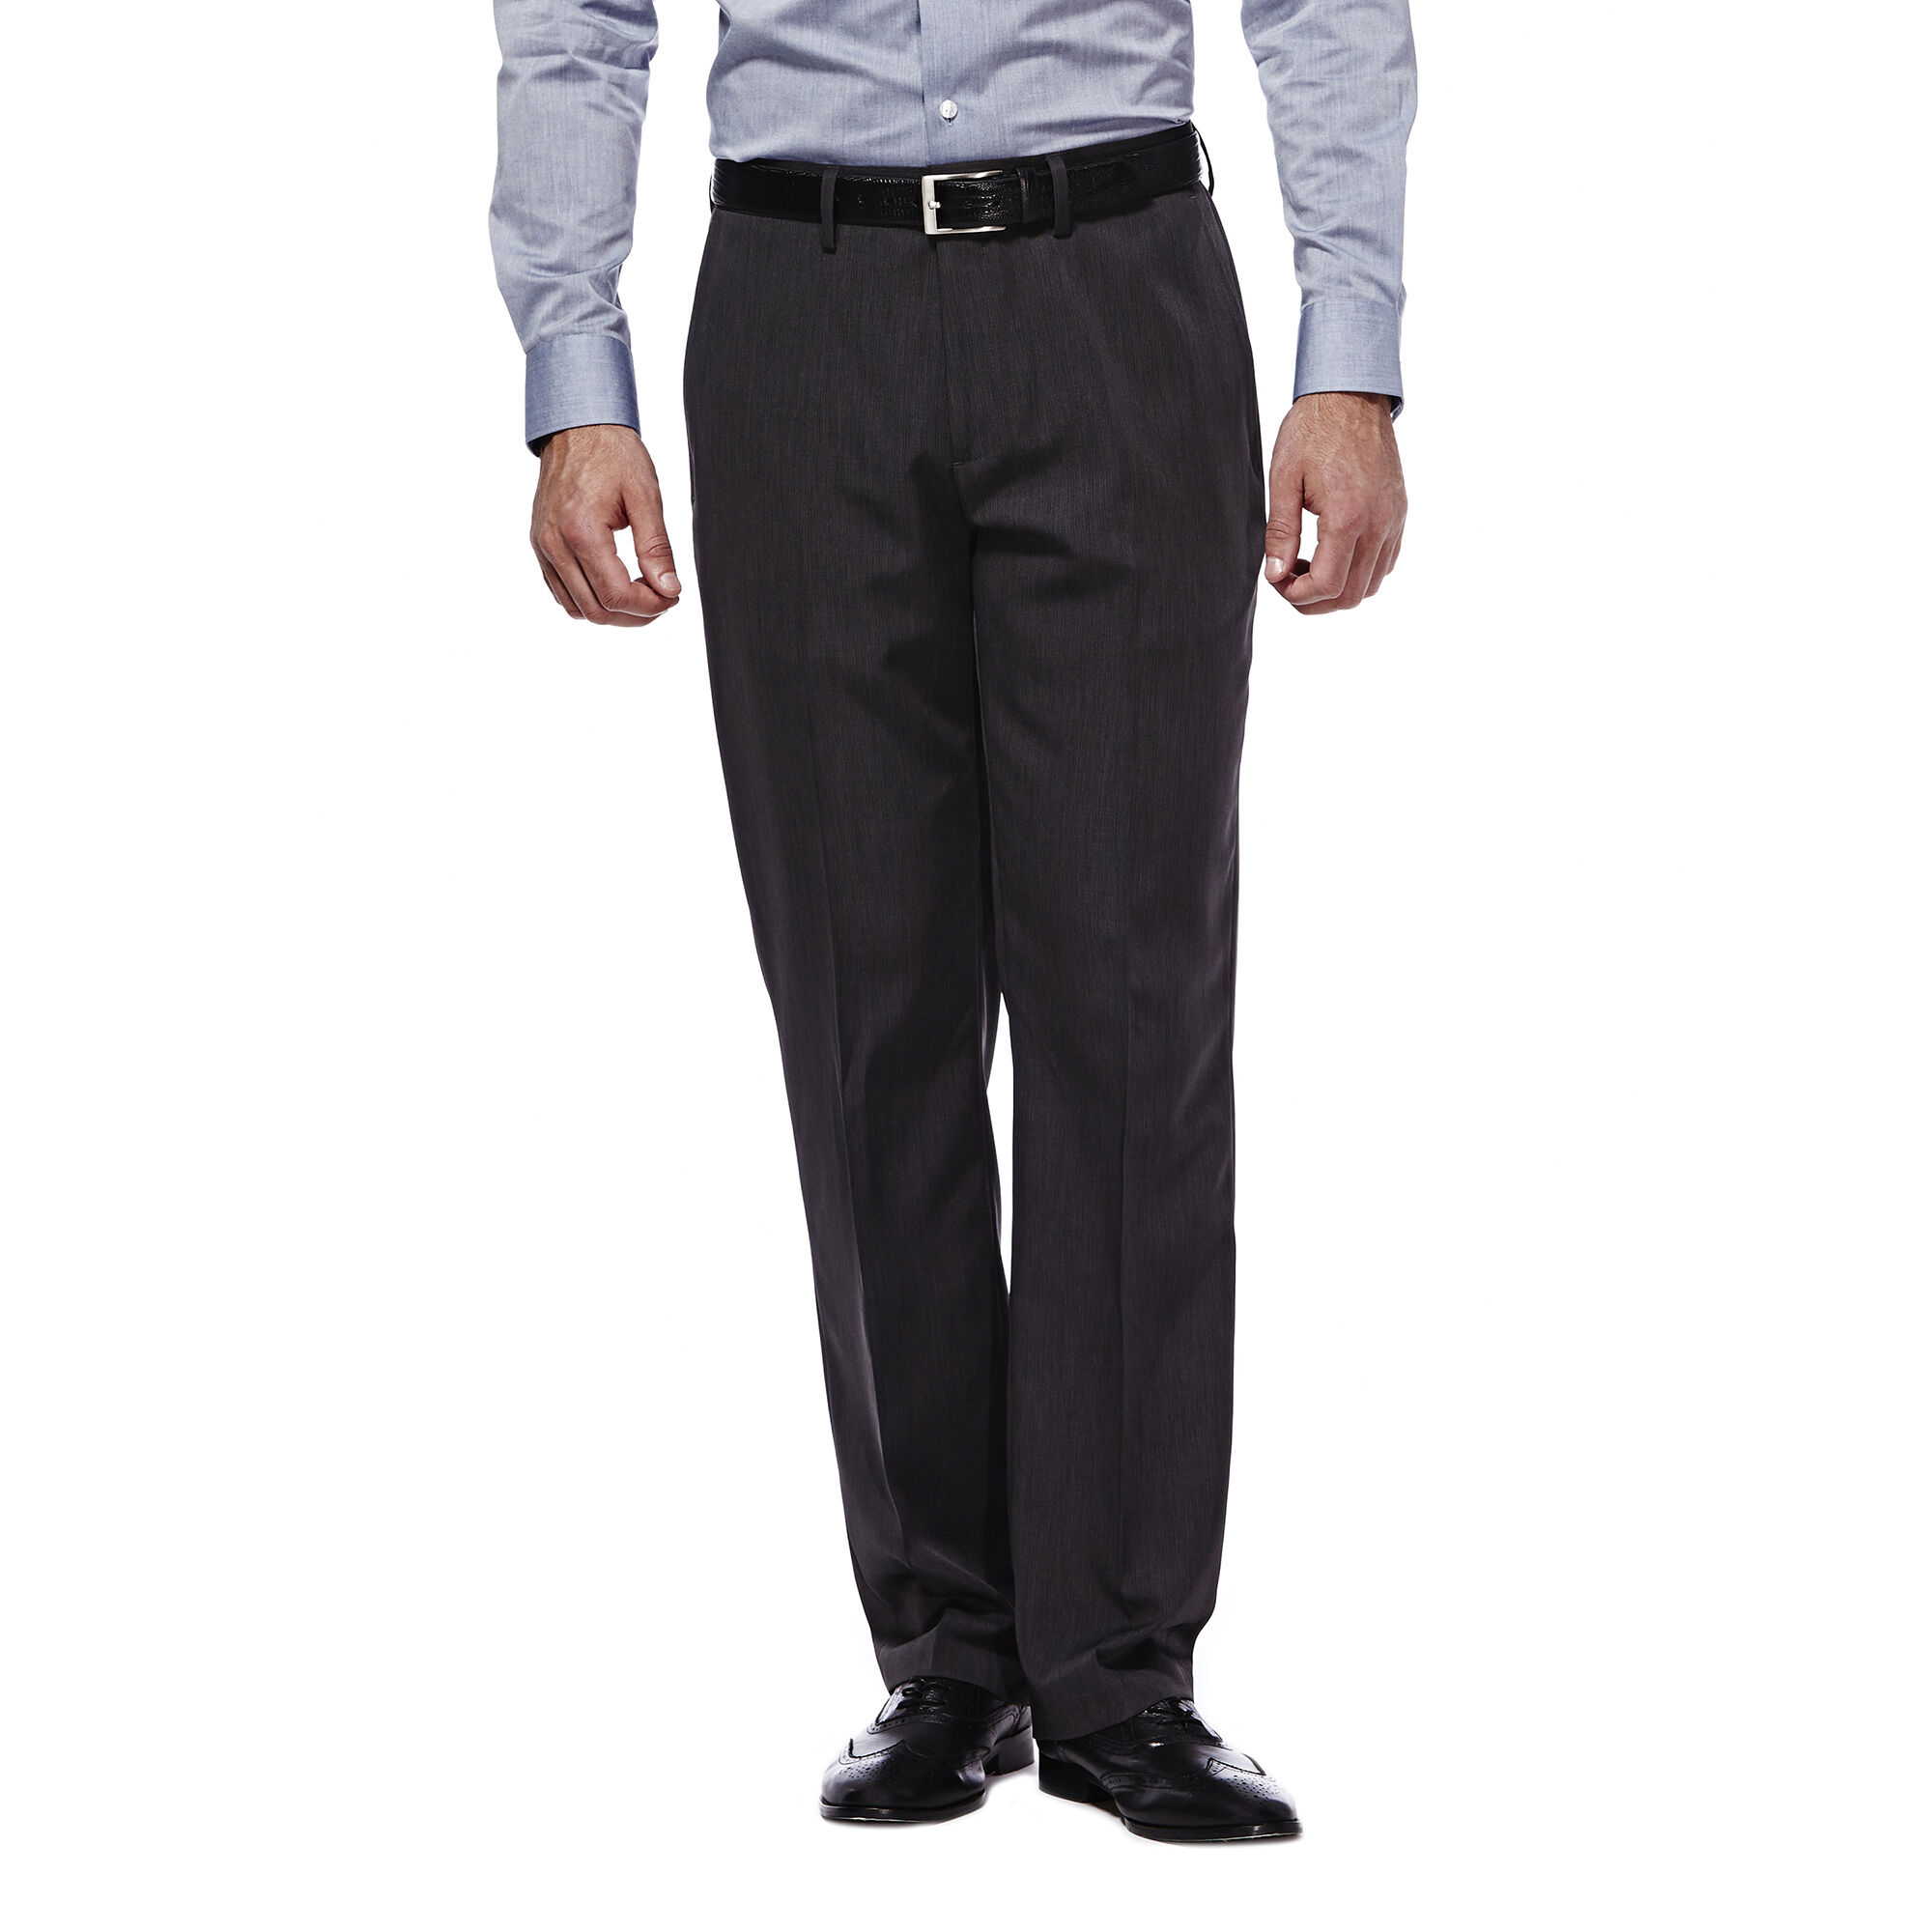 Haggar Travel Performance Suit Separates Pant Black / Charcoal (HY70275 Clothing Suits) photo